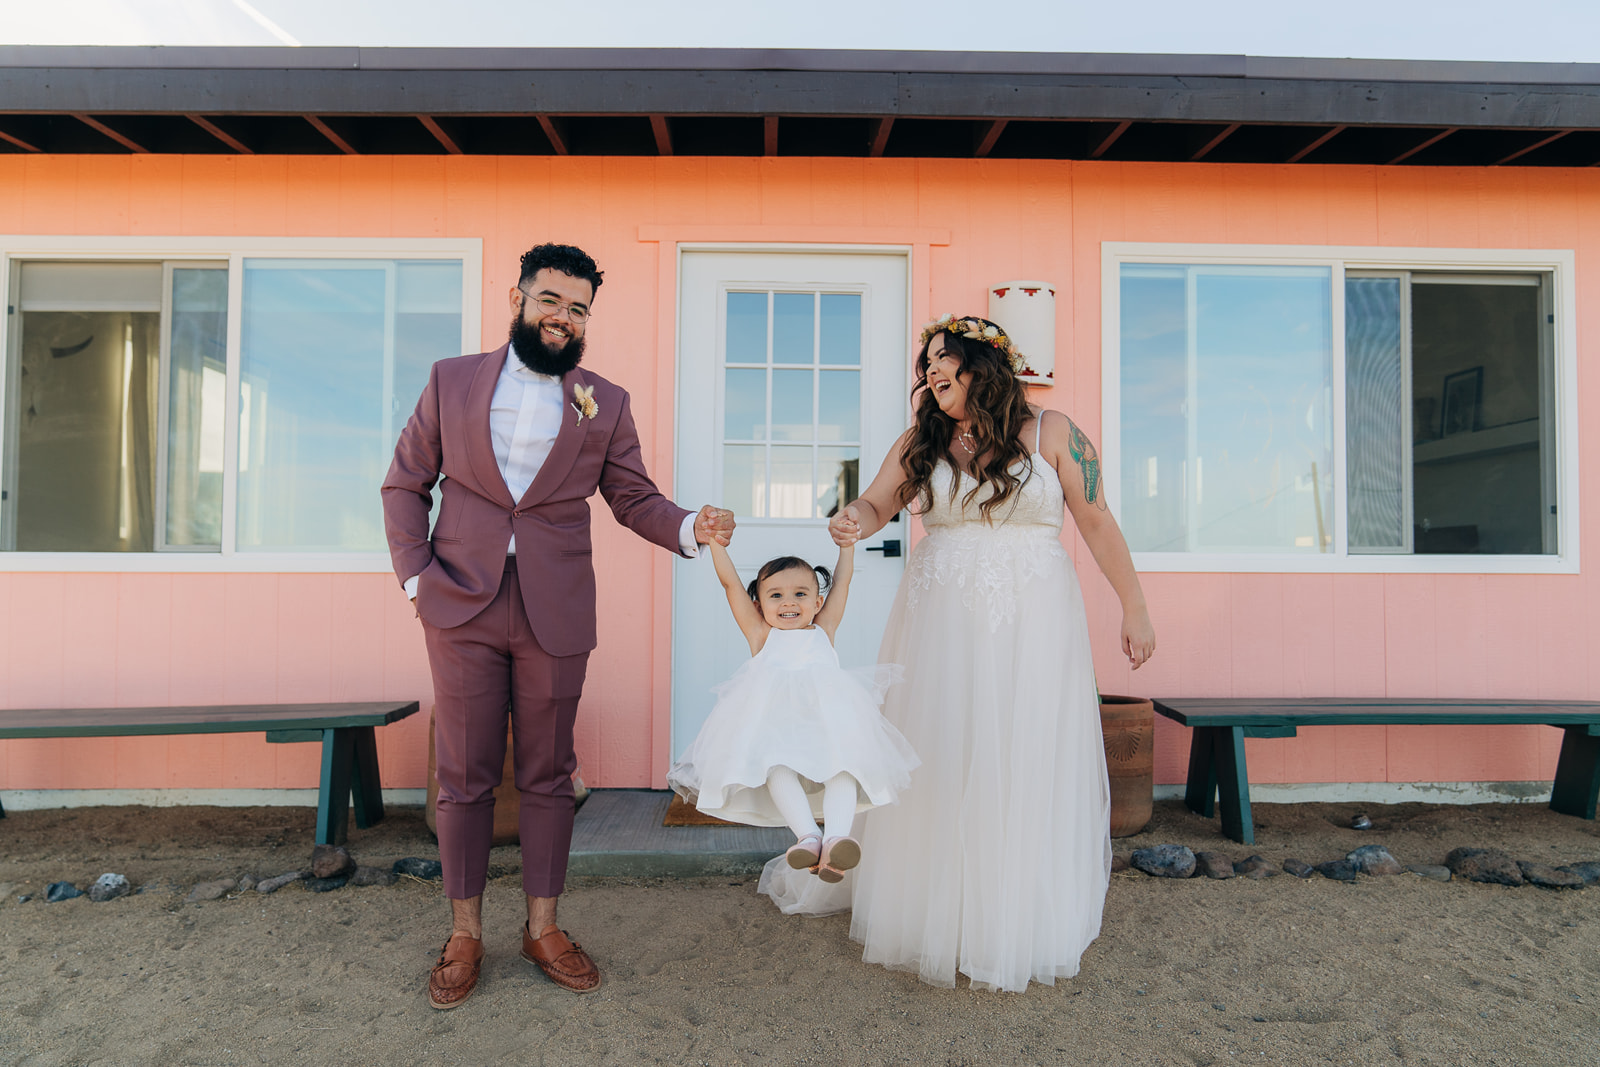 Man, woman and baby celebrate on airbnb wedding day